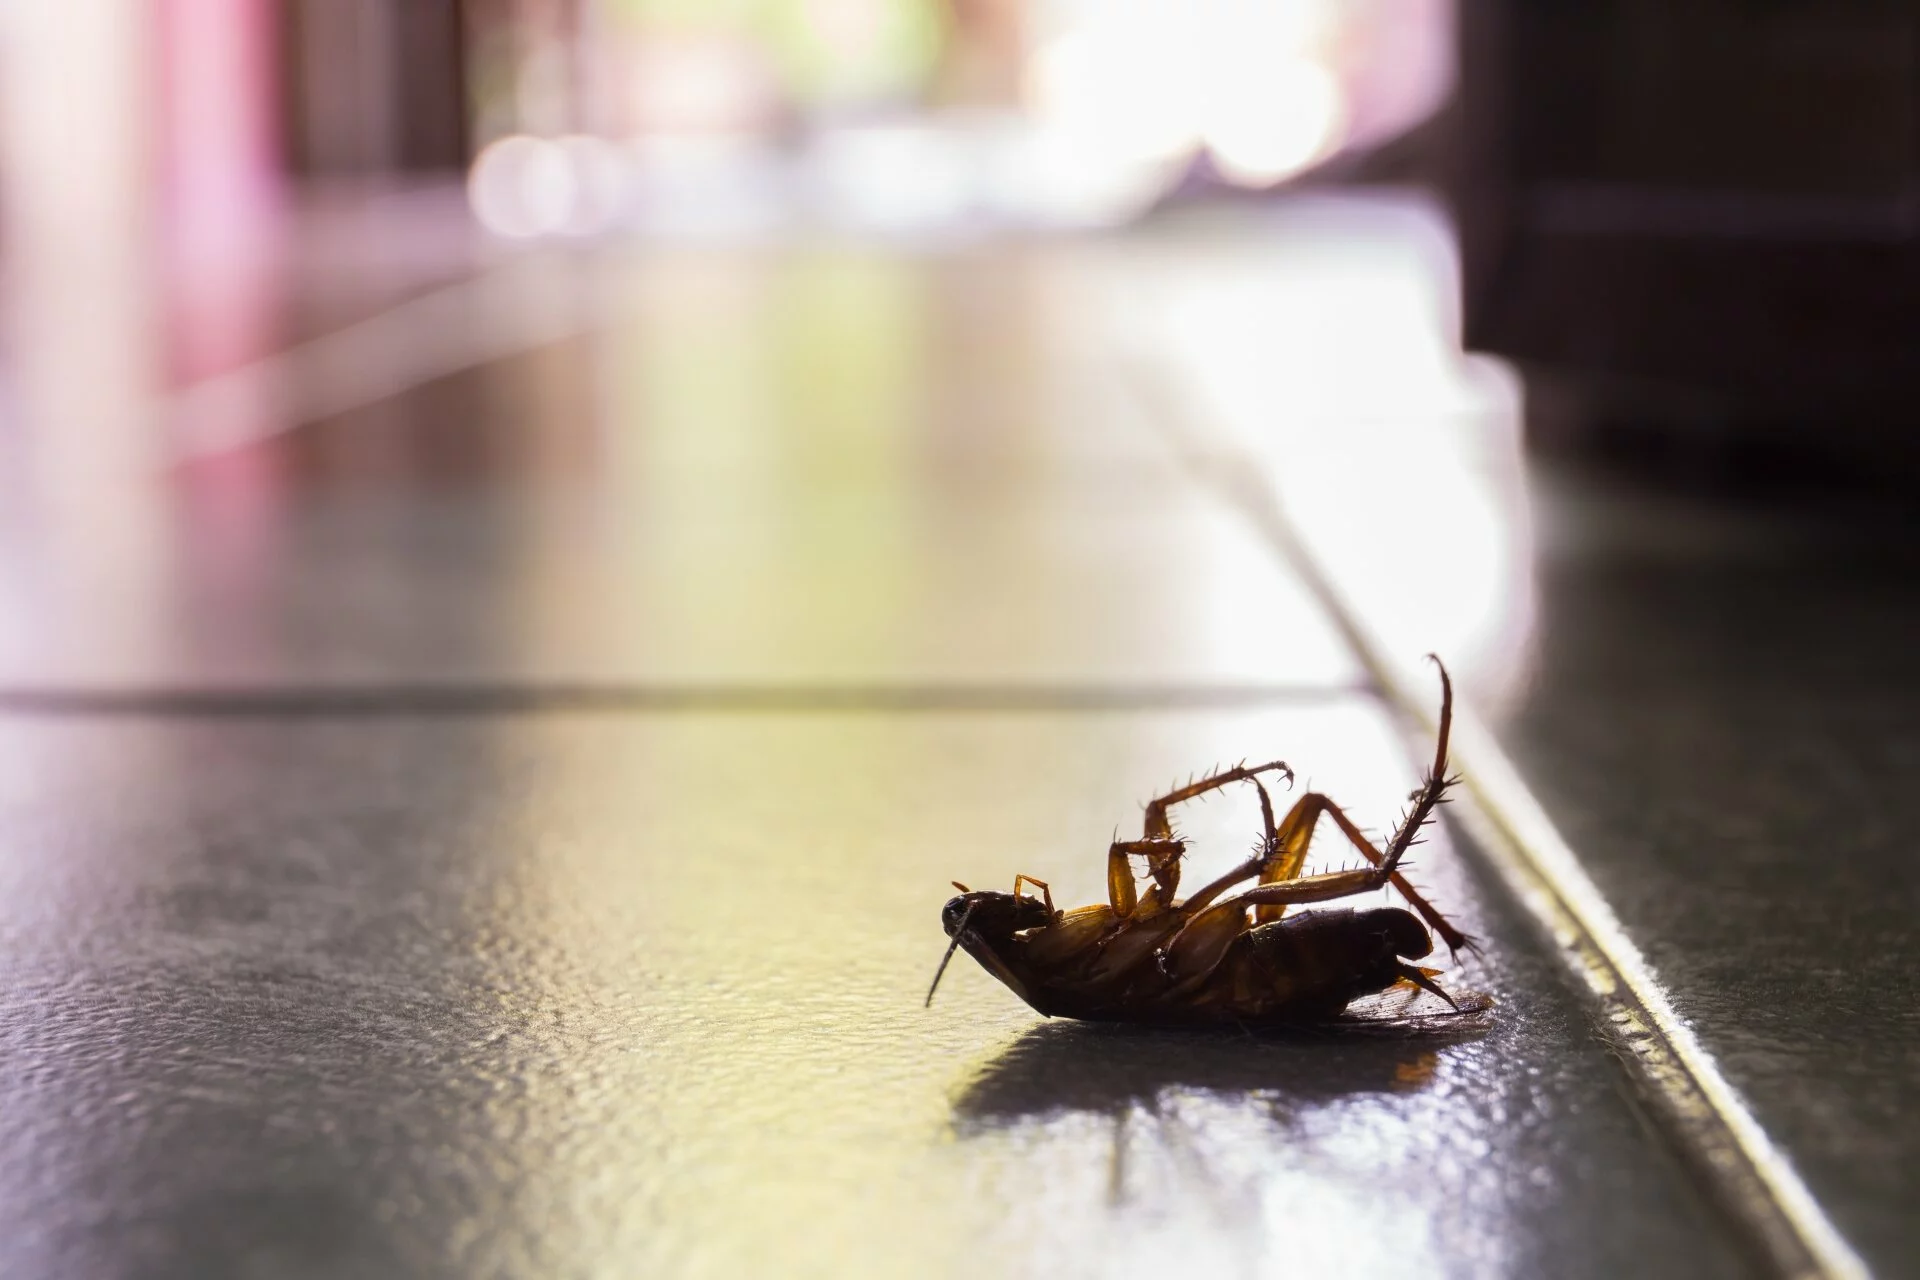 Cockroach Control, Pest Control in Clapton, E5. Call Now 020 8166 9746